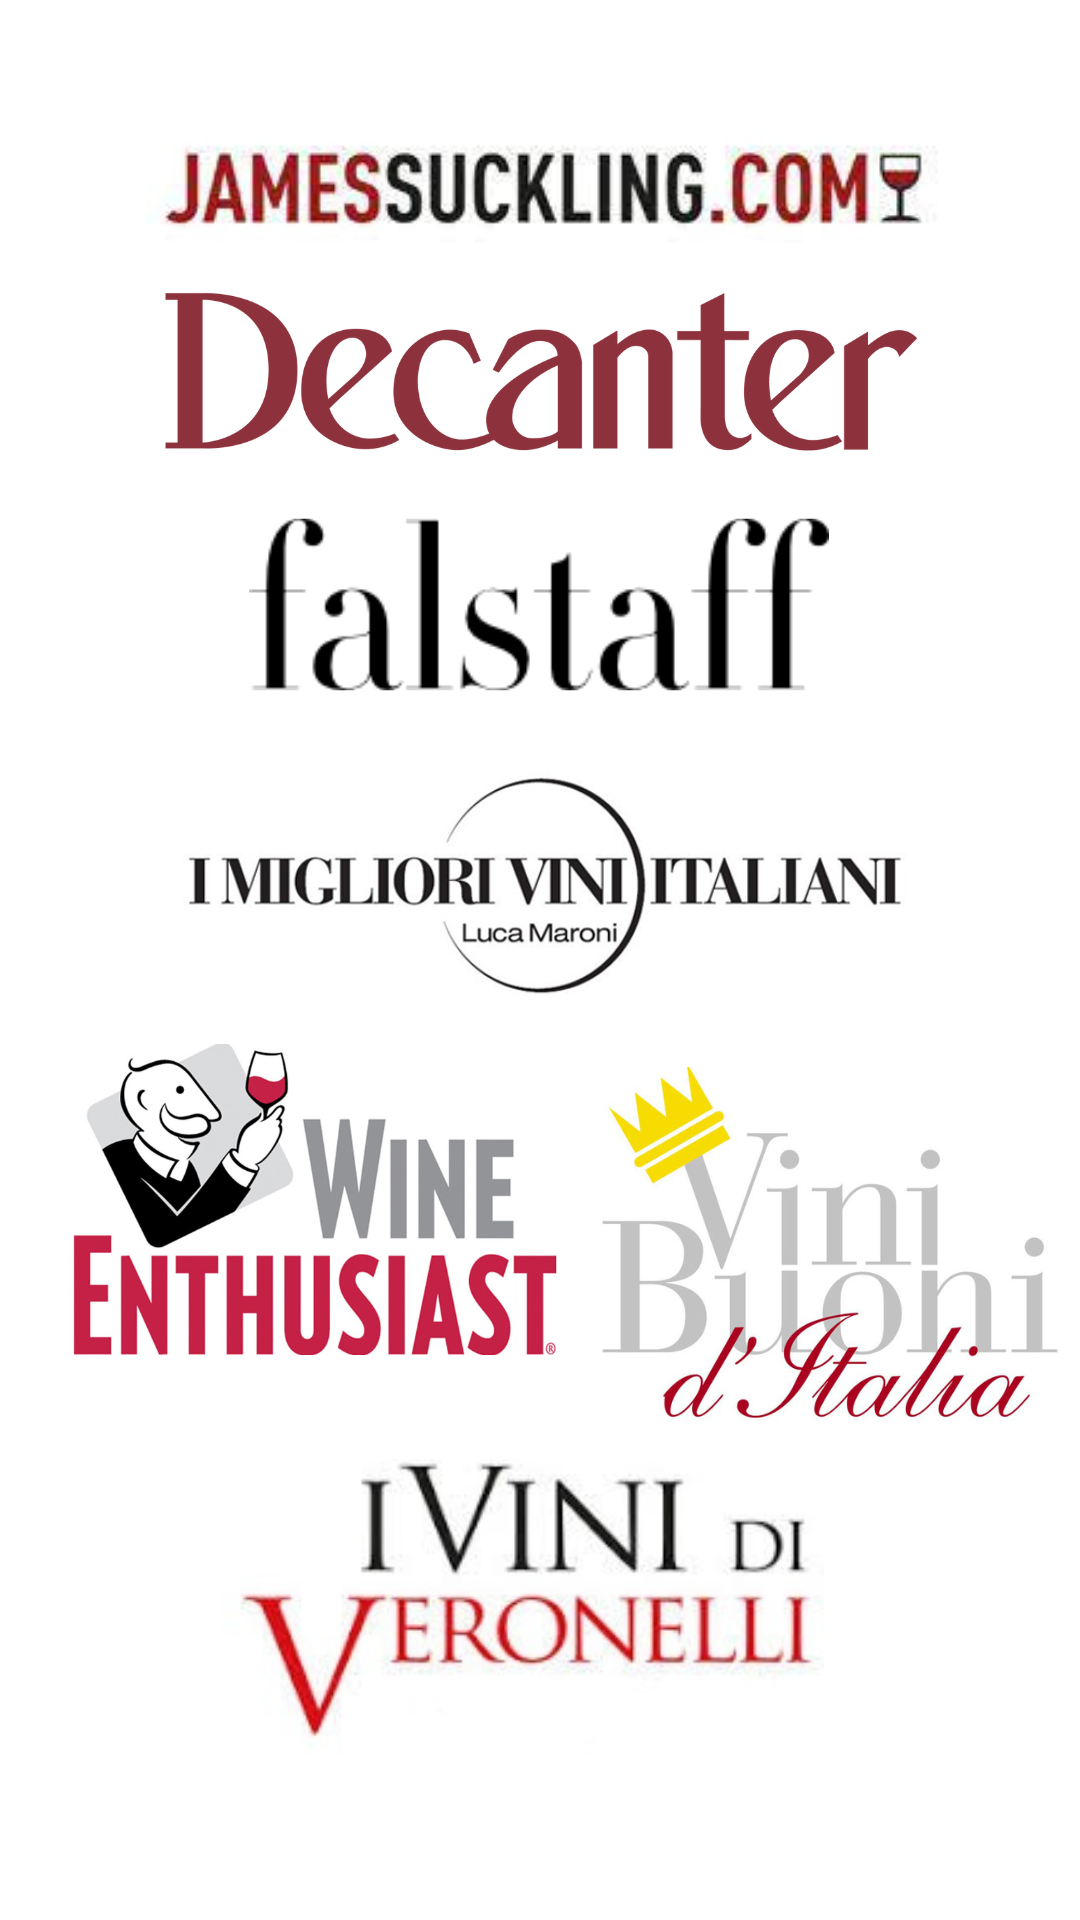 Our wines awarded by the press